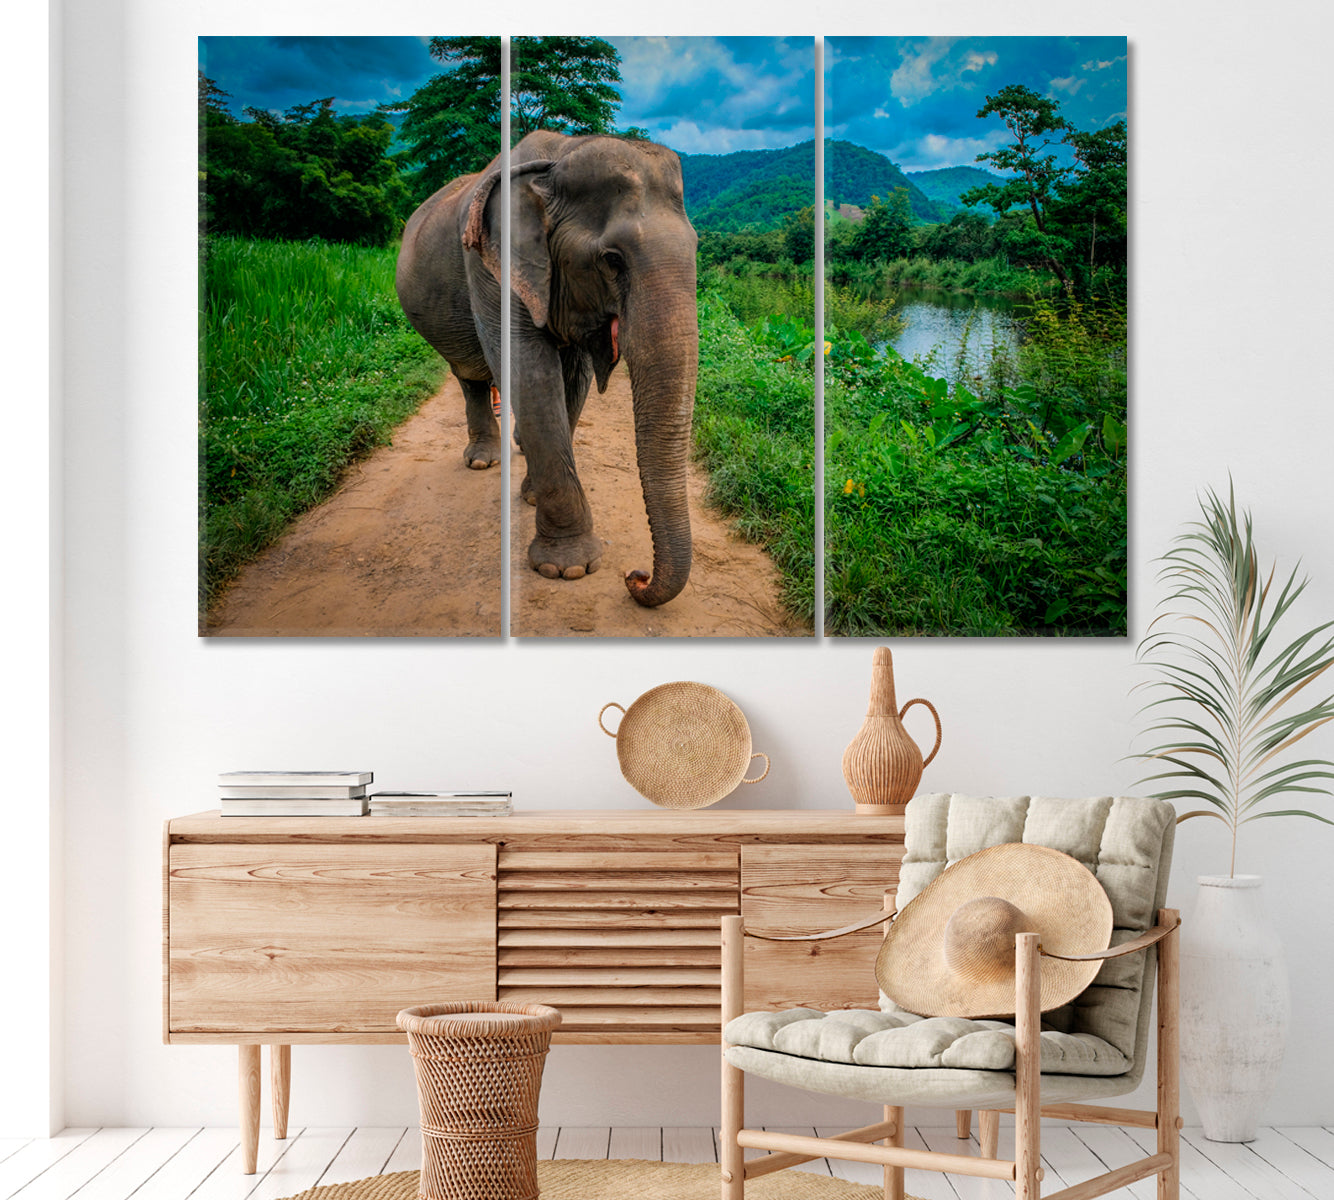 Asian Elephant at Elephant Nature Park in Chiang Mai Thailand Canvas Print ArtLexy 3 Panels 36"x24" inches 